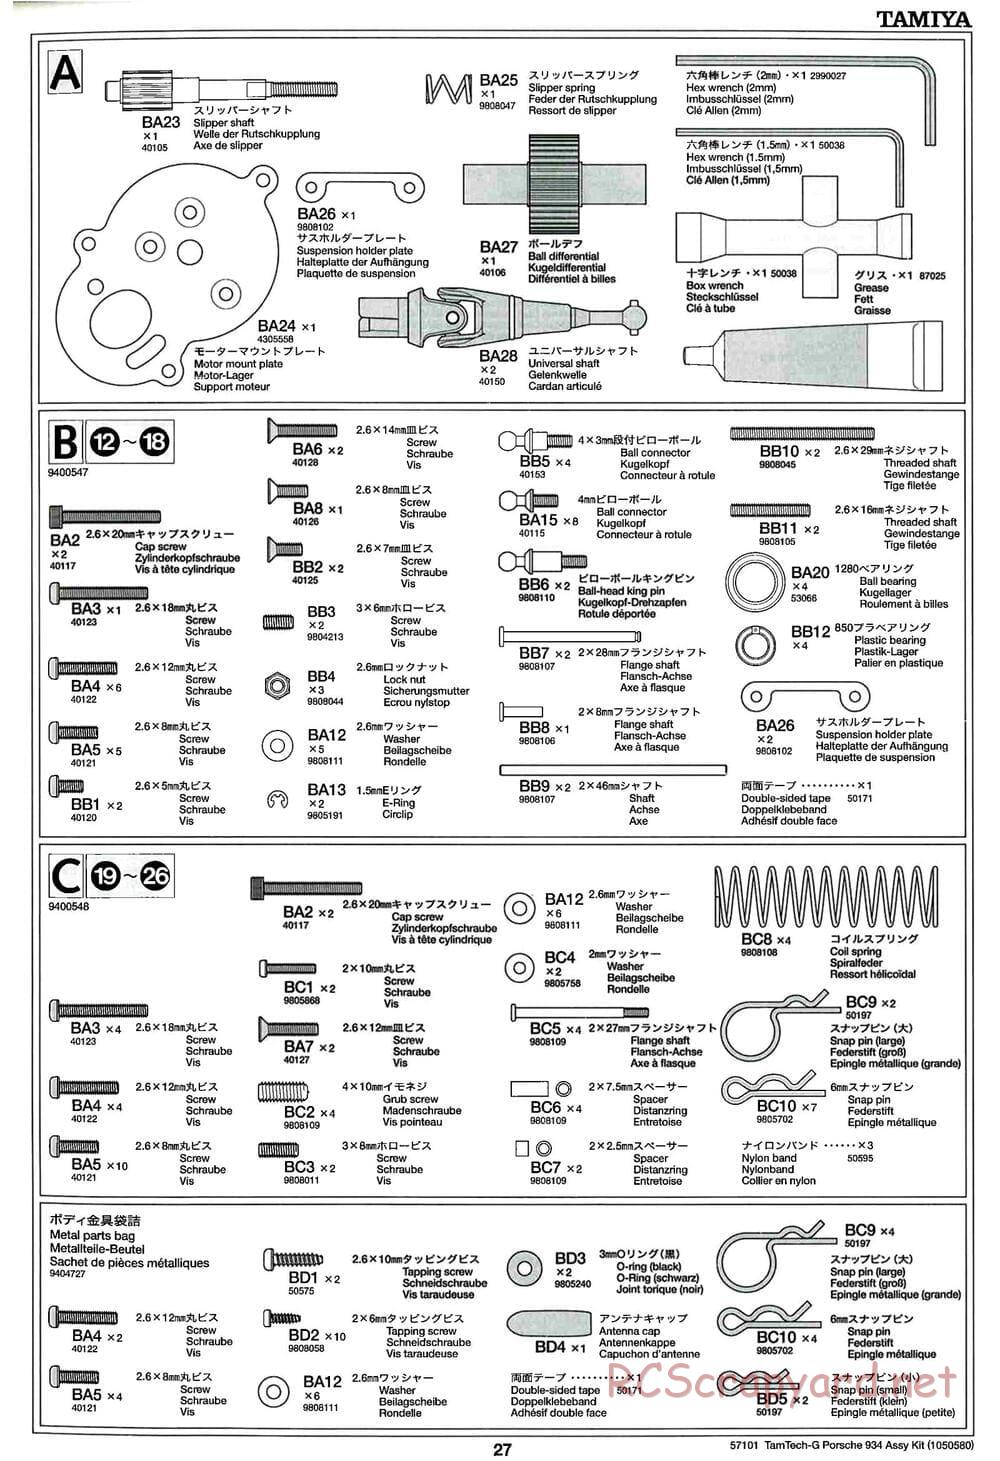 Tamiya - Porsche Turbo RSR - GT-01 Chassis - Manual - Page 27